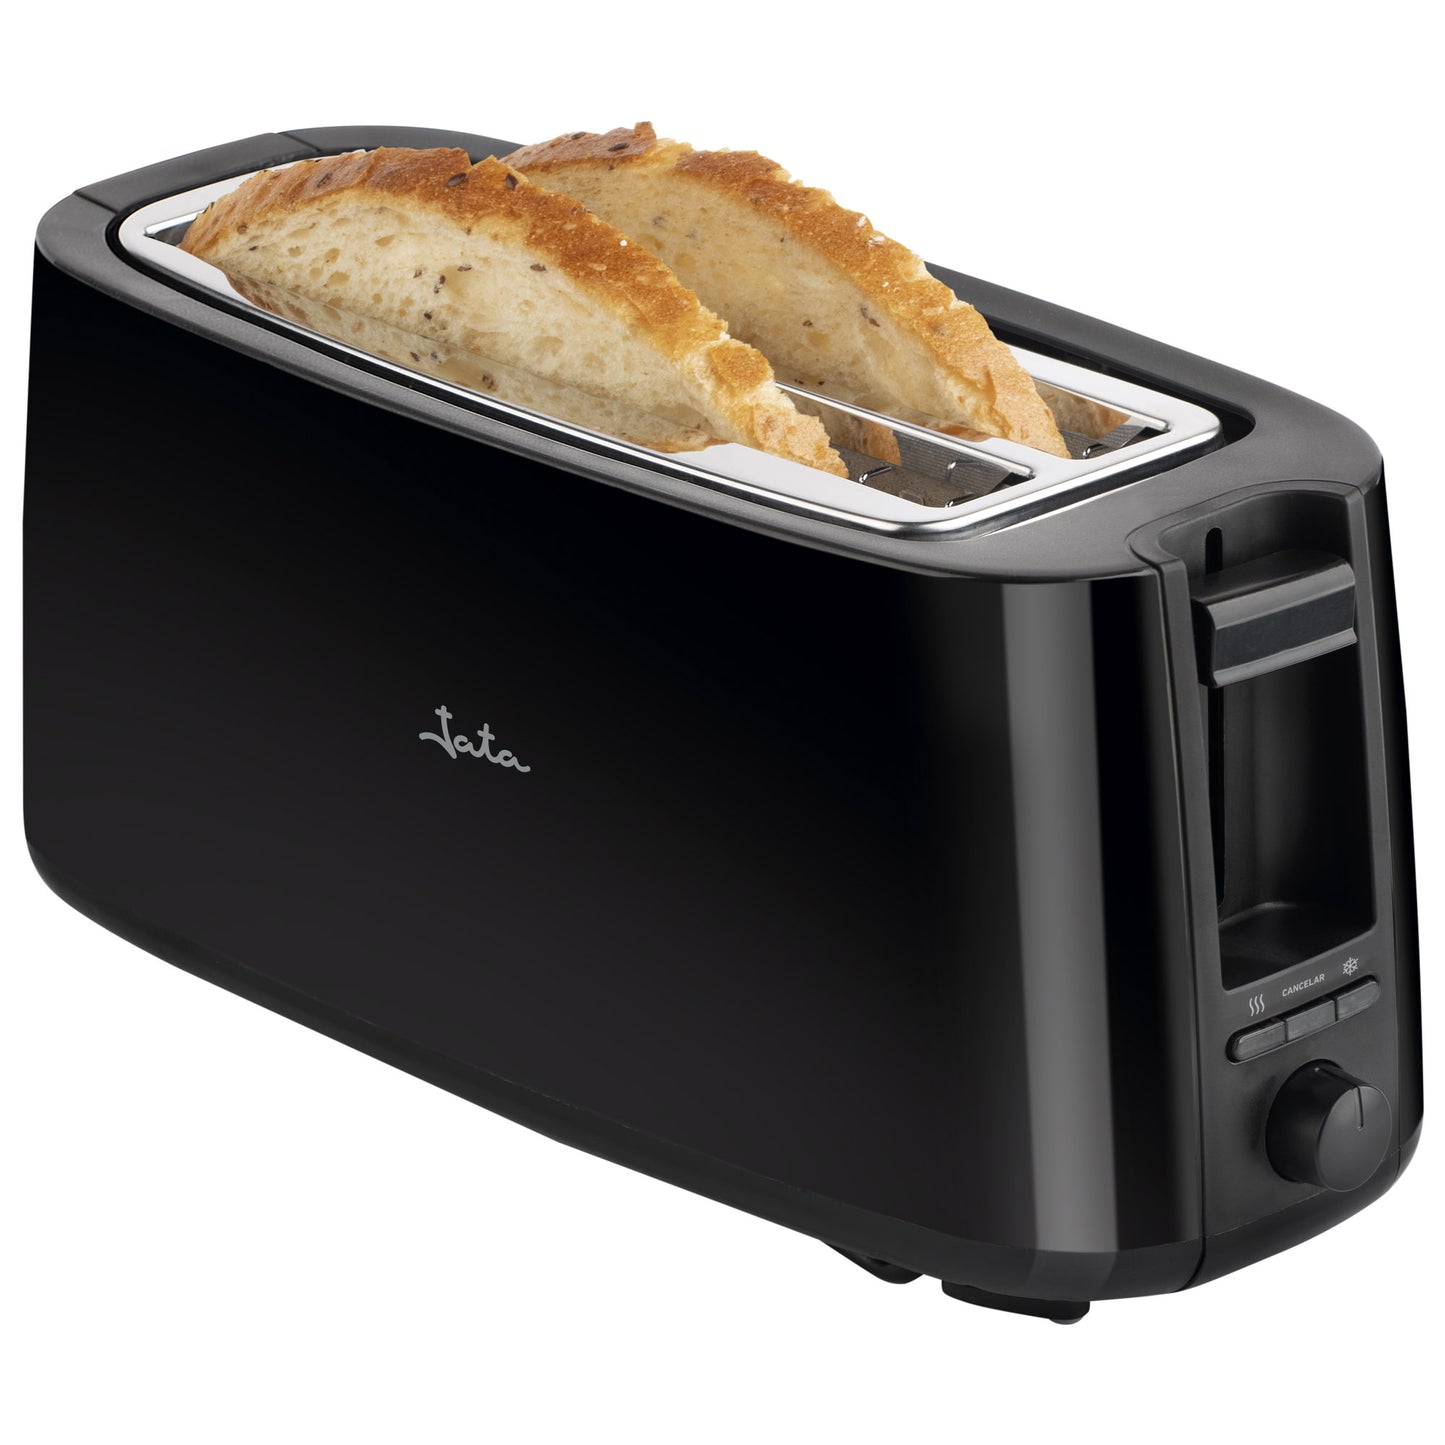 Cold touch toaster Jata JETT1585, 7 levels